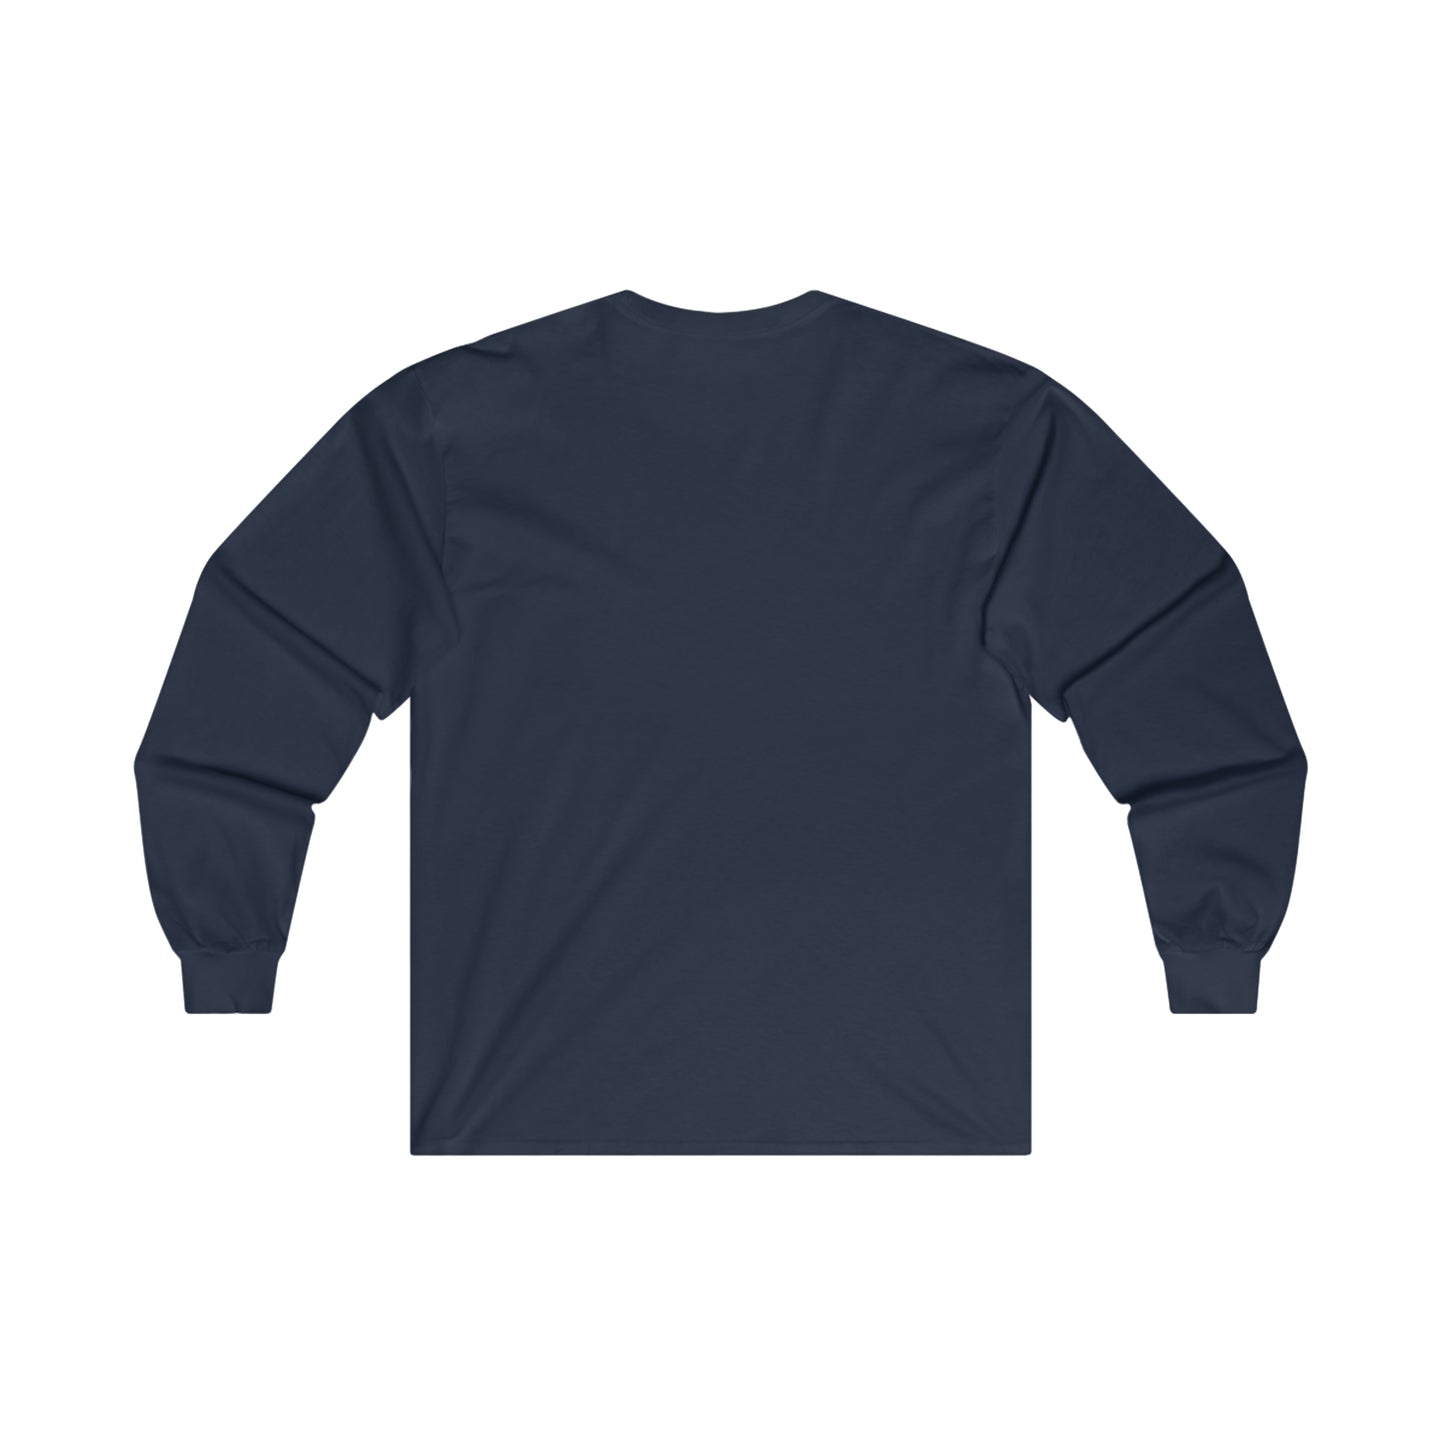 Fifth Year Beer Spill - Ultra Cotton Long Sleeve Tee